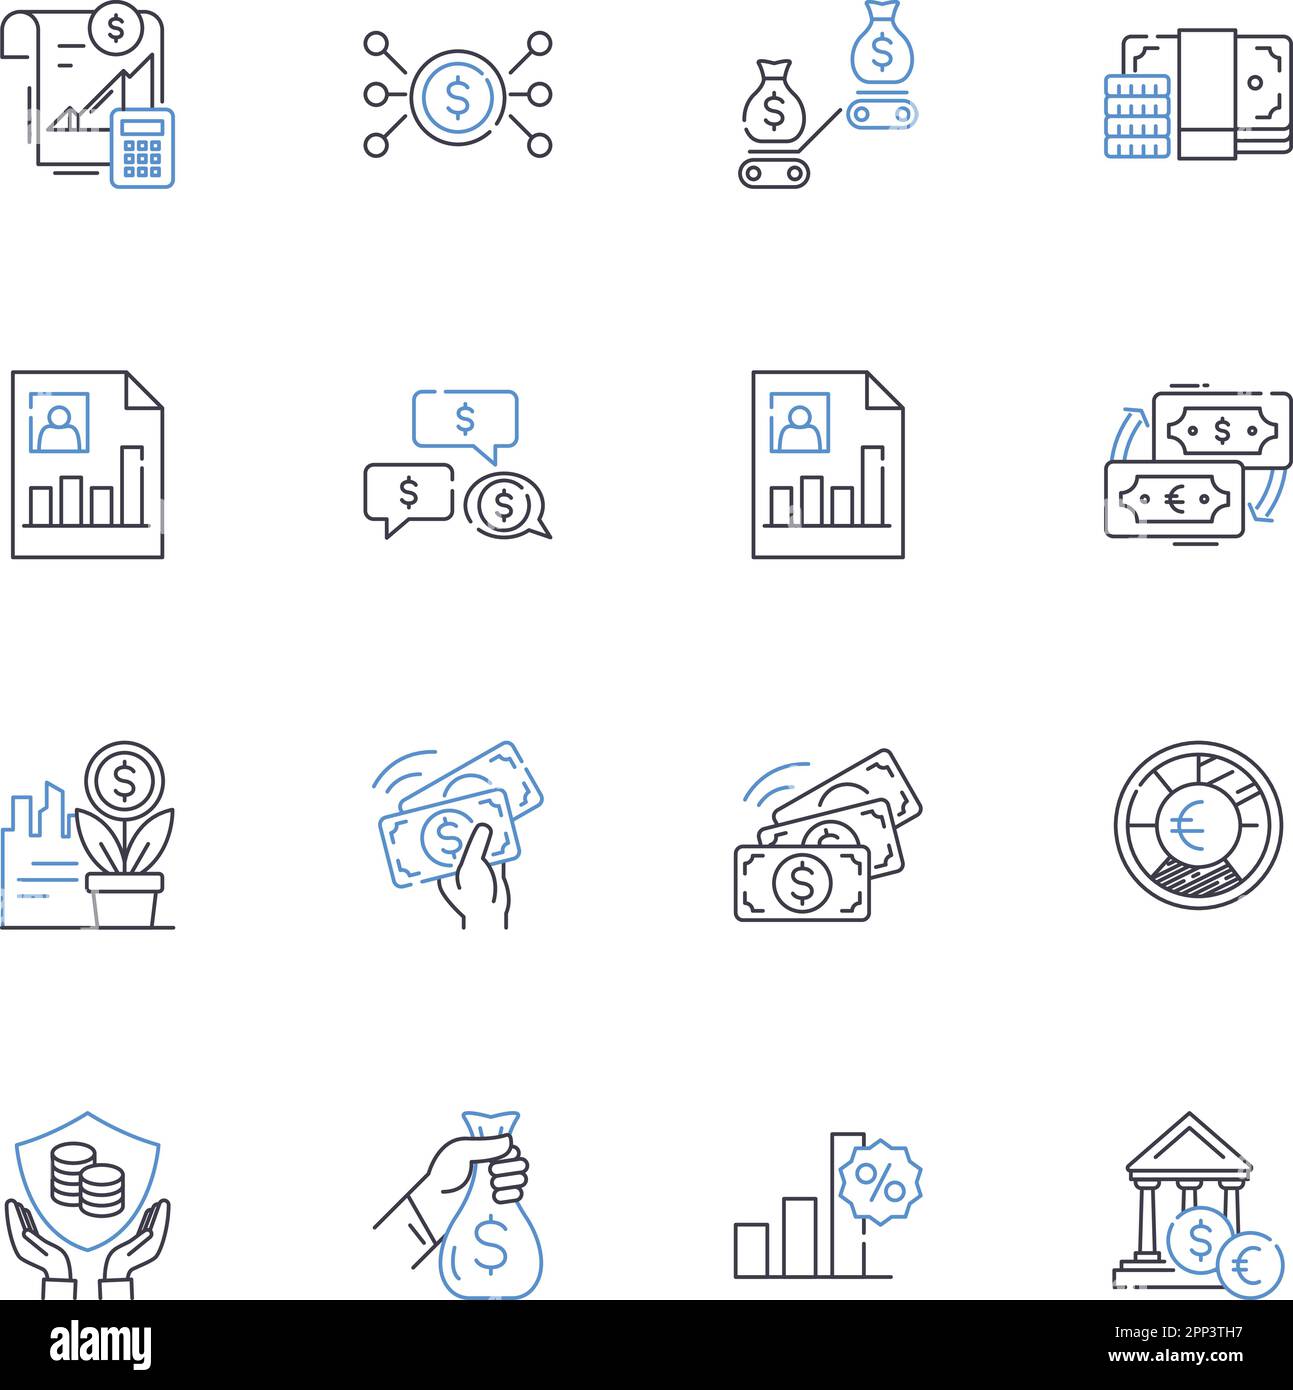 Stock squad line icons collection. Trading, Stocks, Investments, Analysis, Portfolio, Dividends, Market vector and linear illustration. Profits Stock Vector